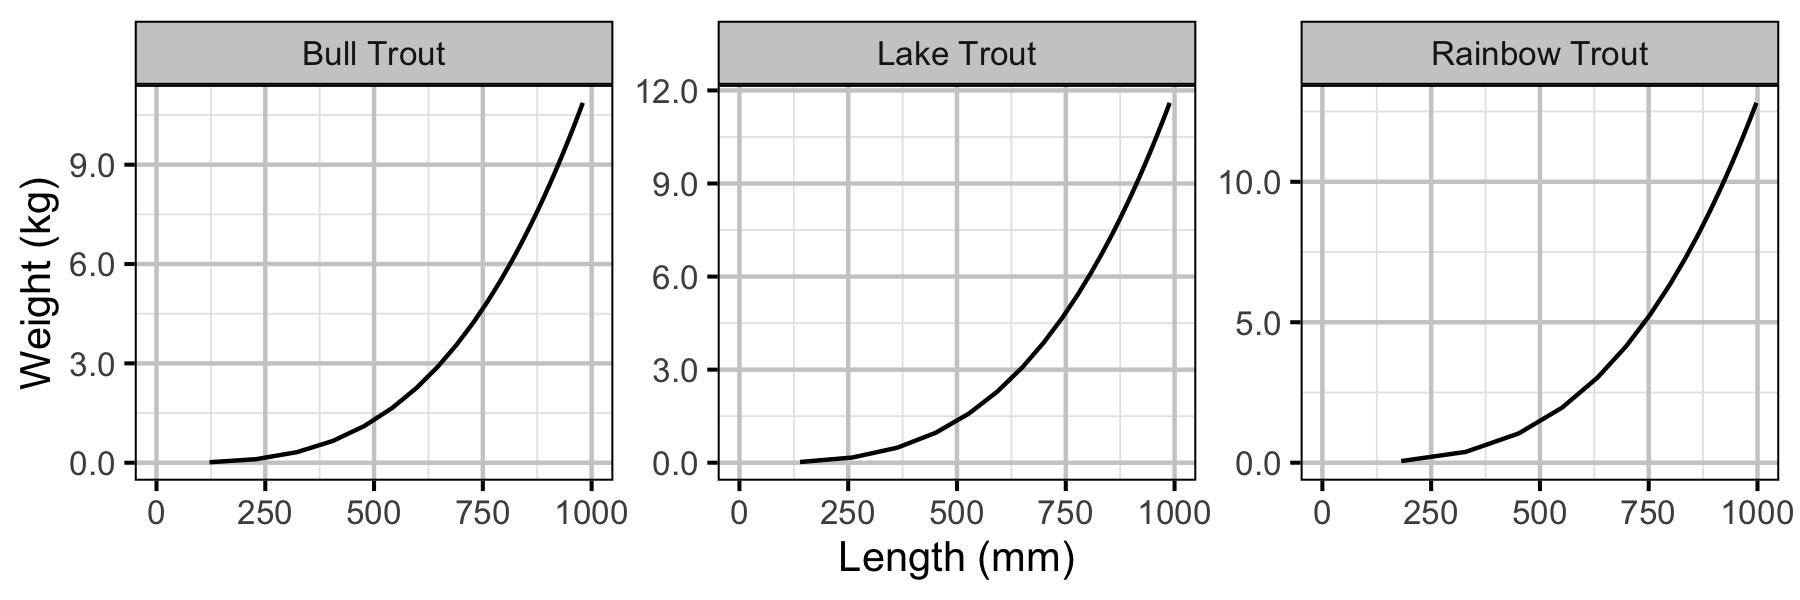 figures/yield/slot/weight_length.png